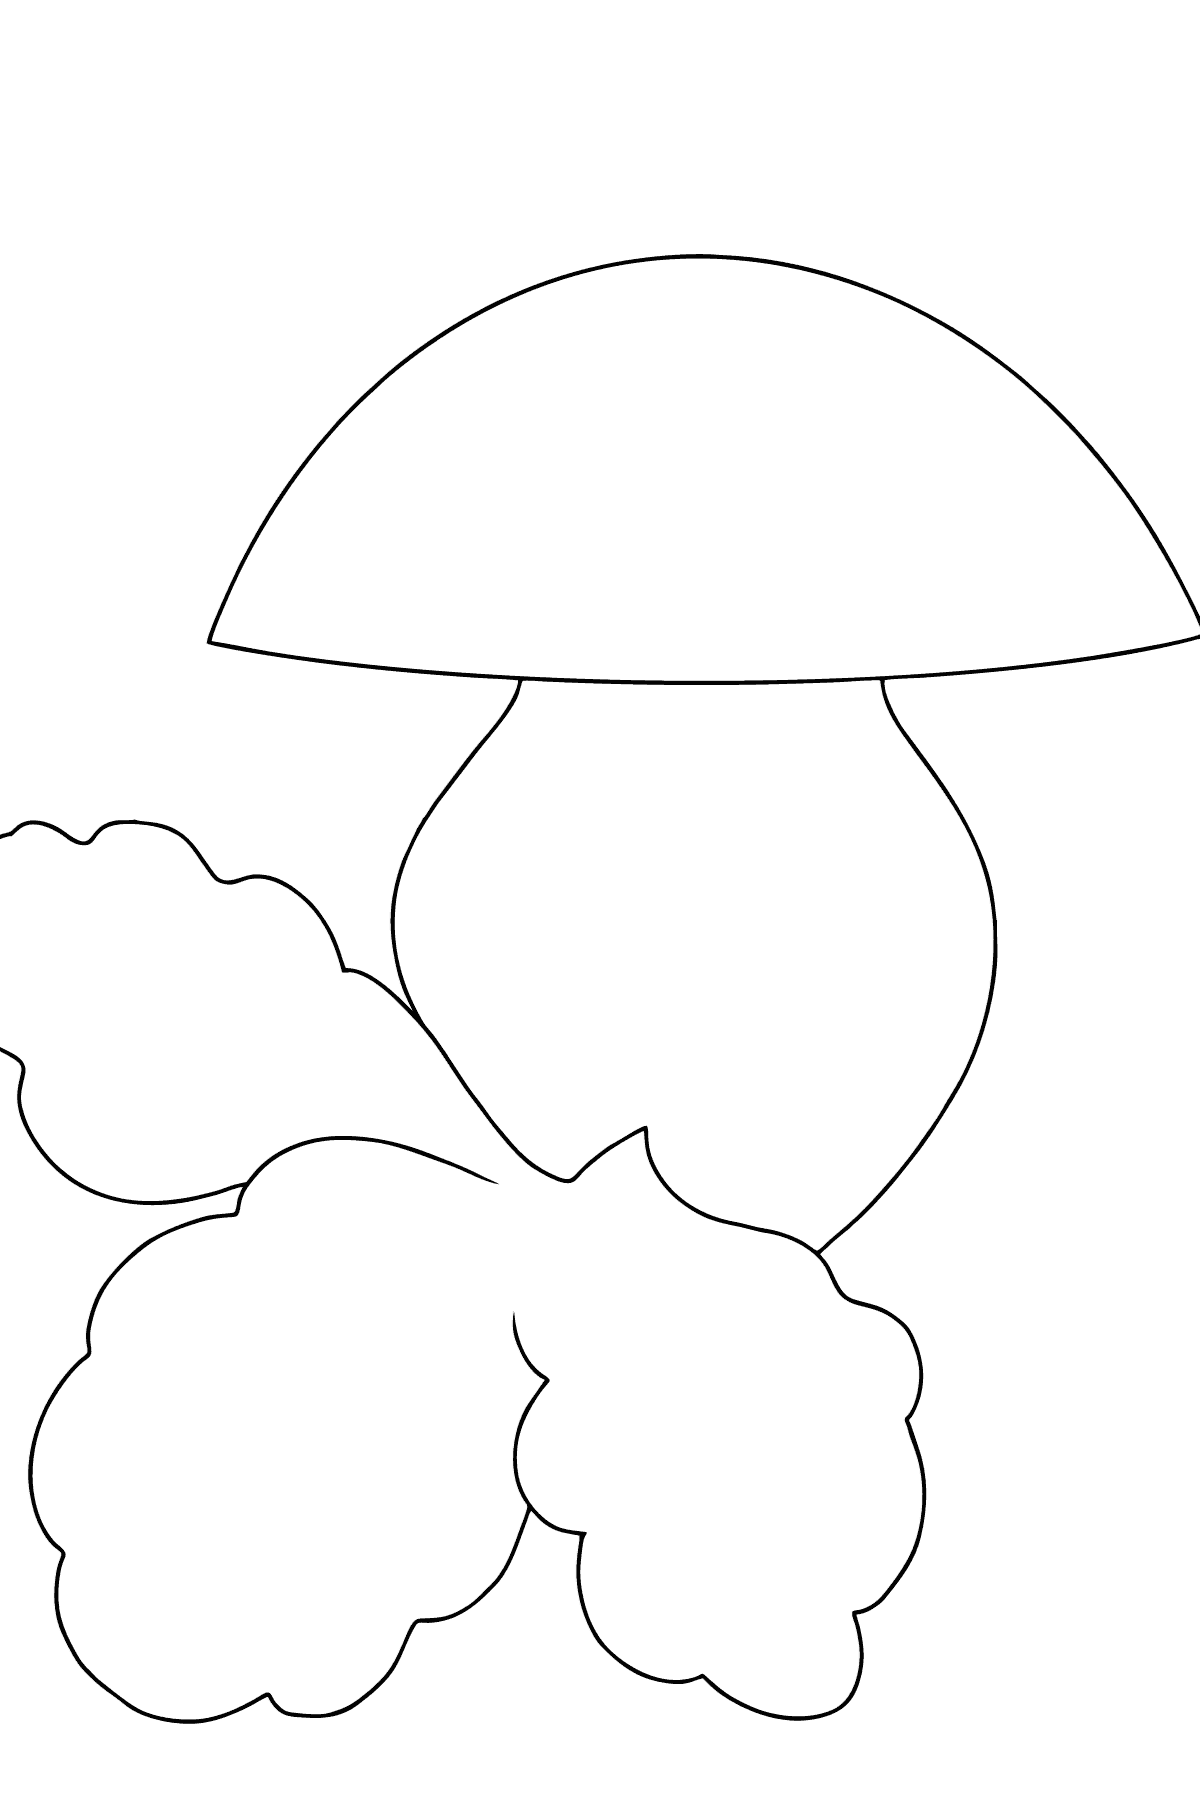 Autumn Coloring Page - Mushrooms in the Forest for Children 